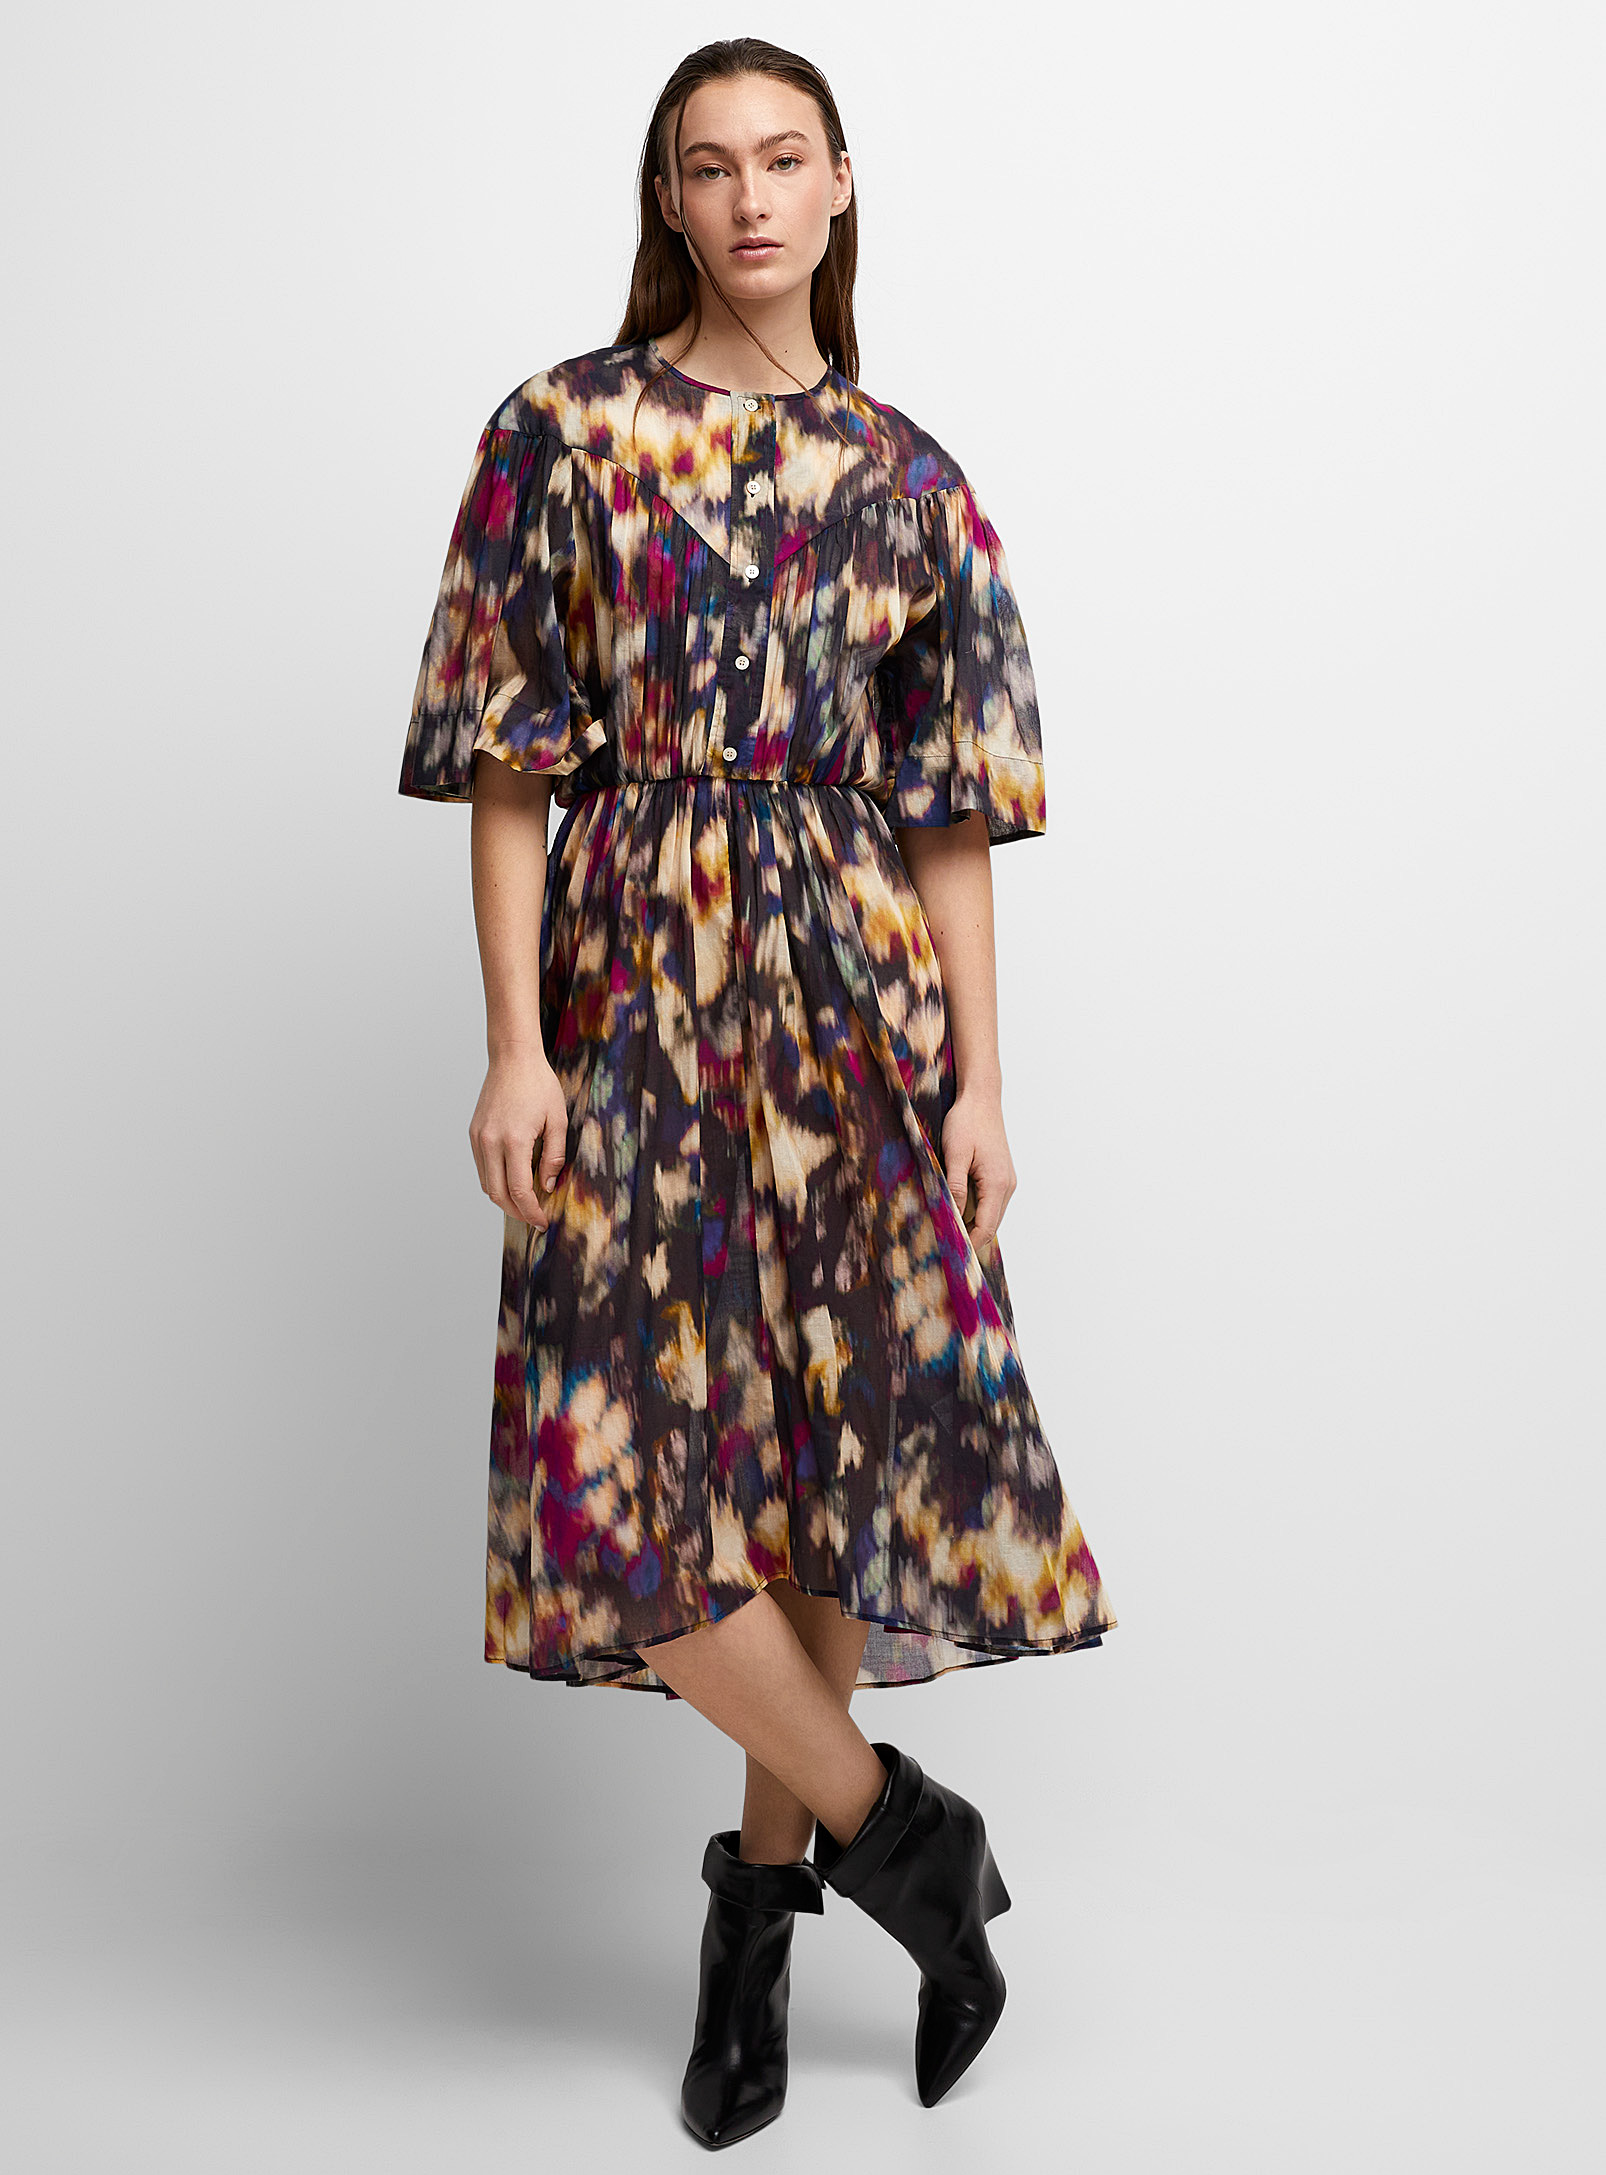 Isabel Marant Étoile Maggy Chiffon Dress In Patterned Black